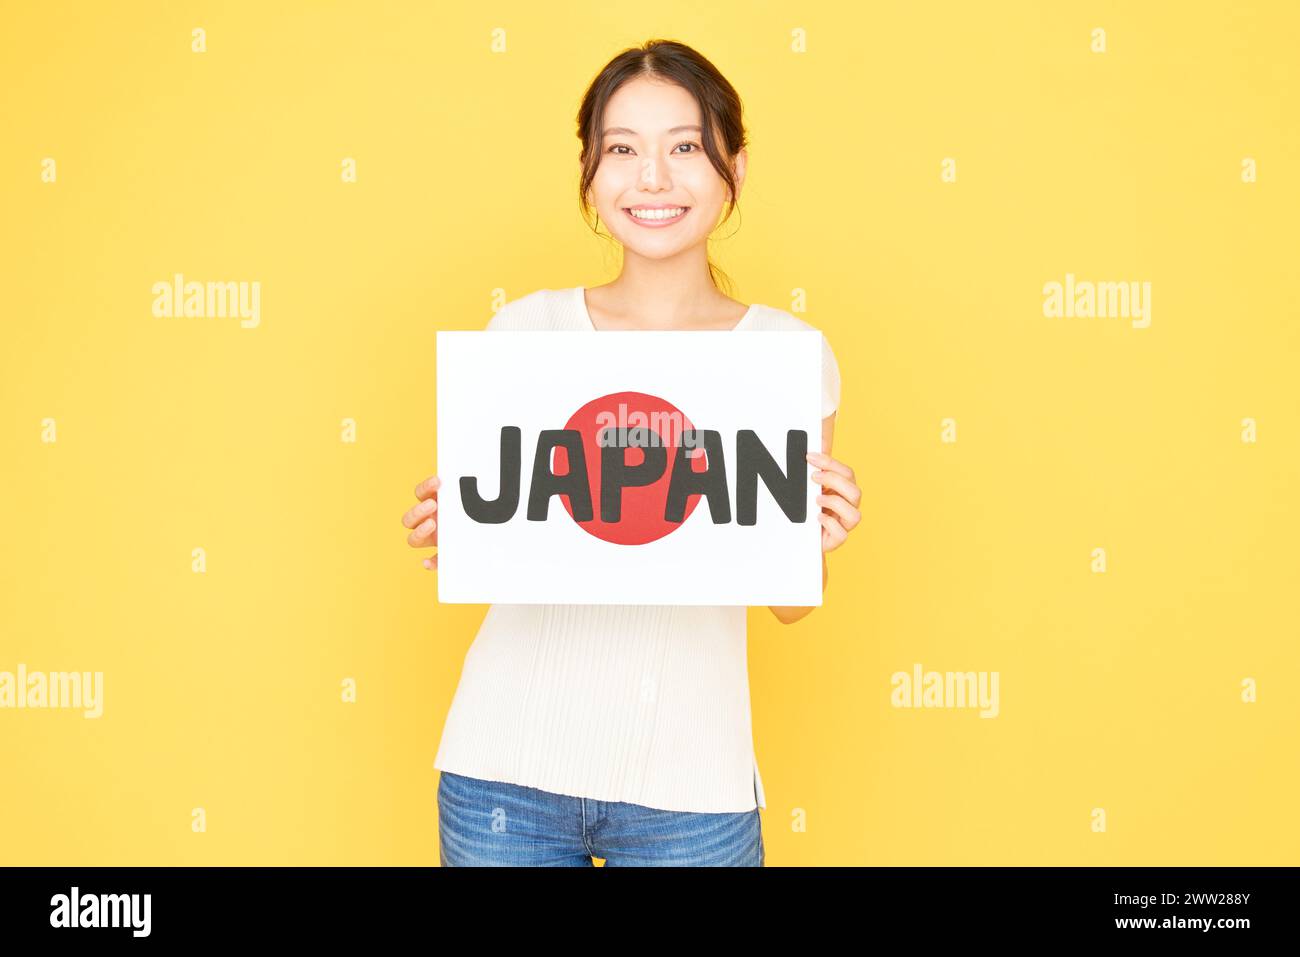 Japanese woman holding up a sign with the word Japan Stock Photo